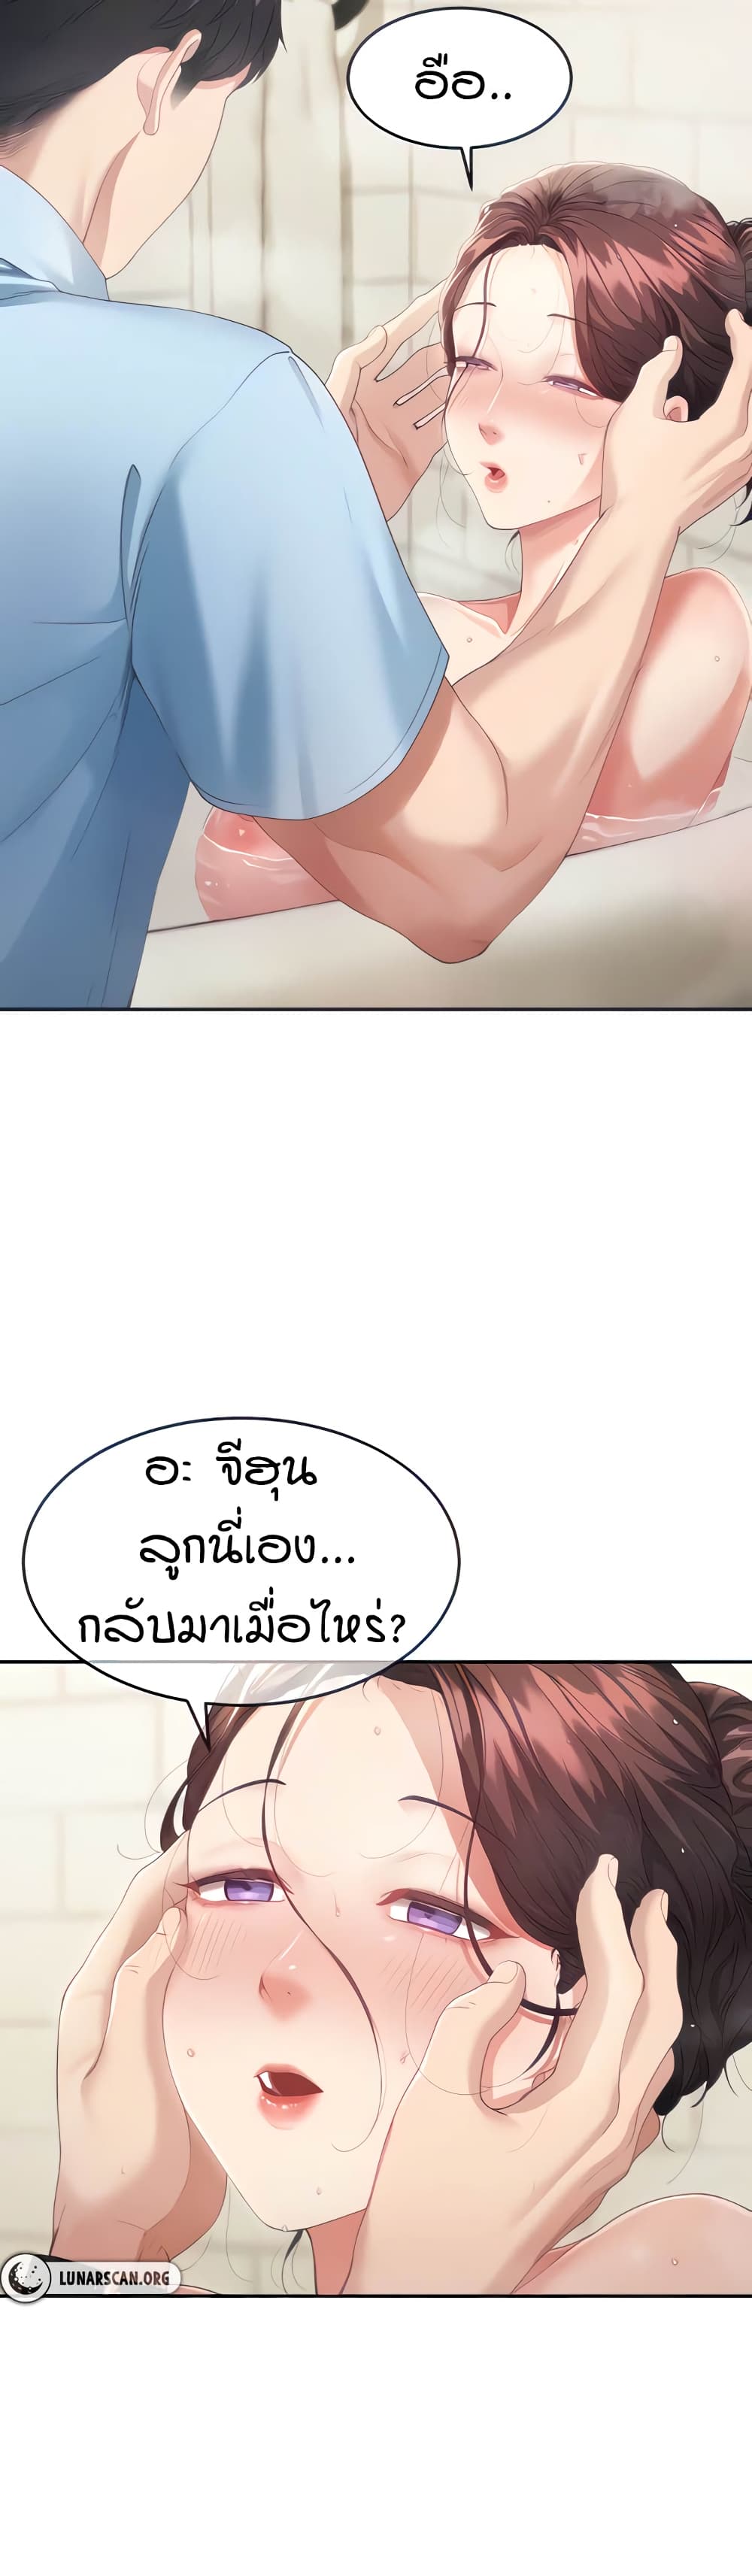 Is It Your Mother or Sister? ตอนที่ 4 ภาพ 4